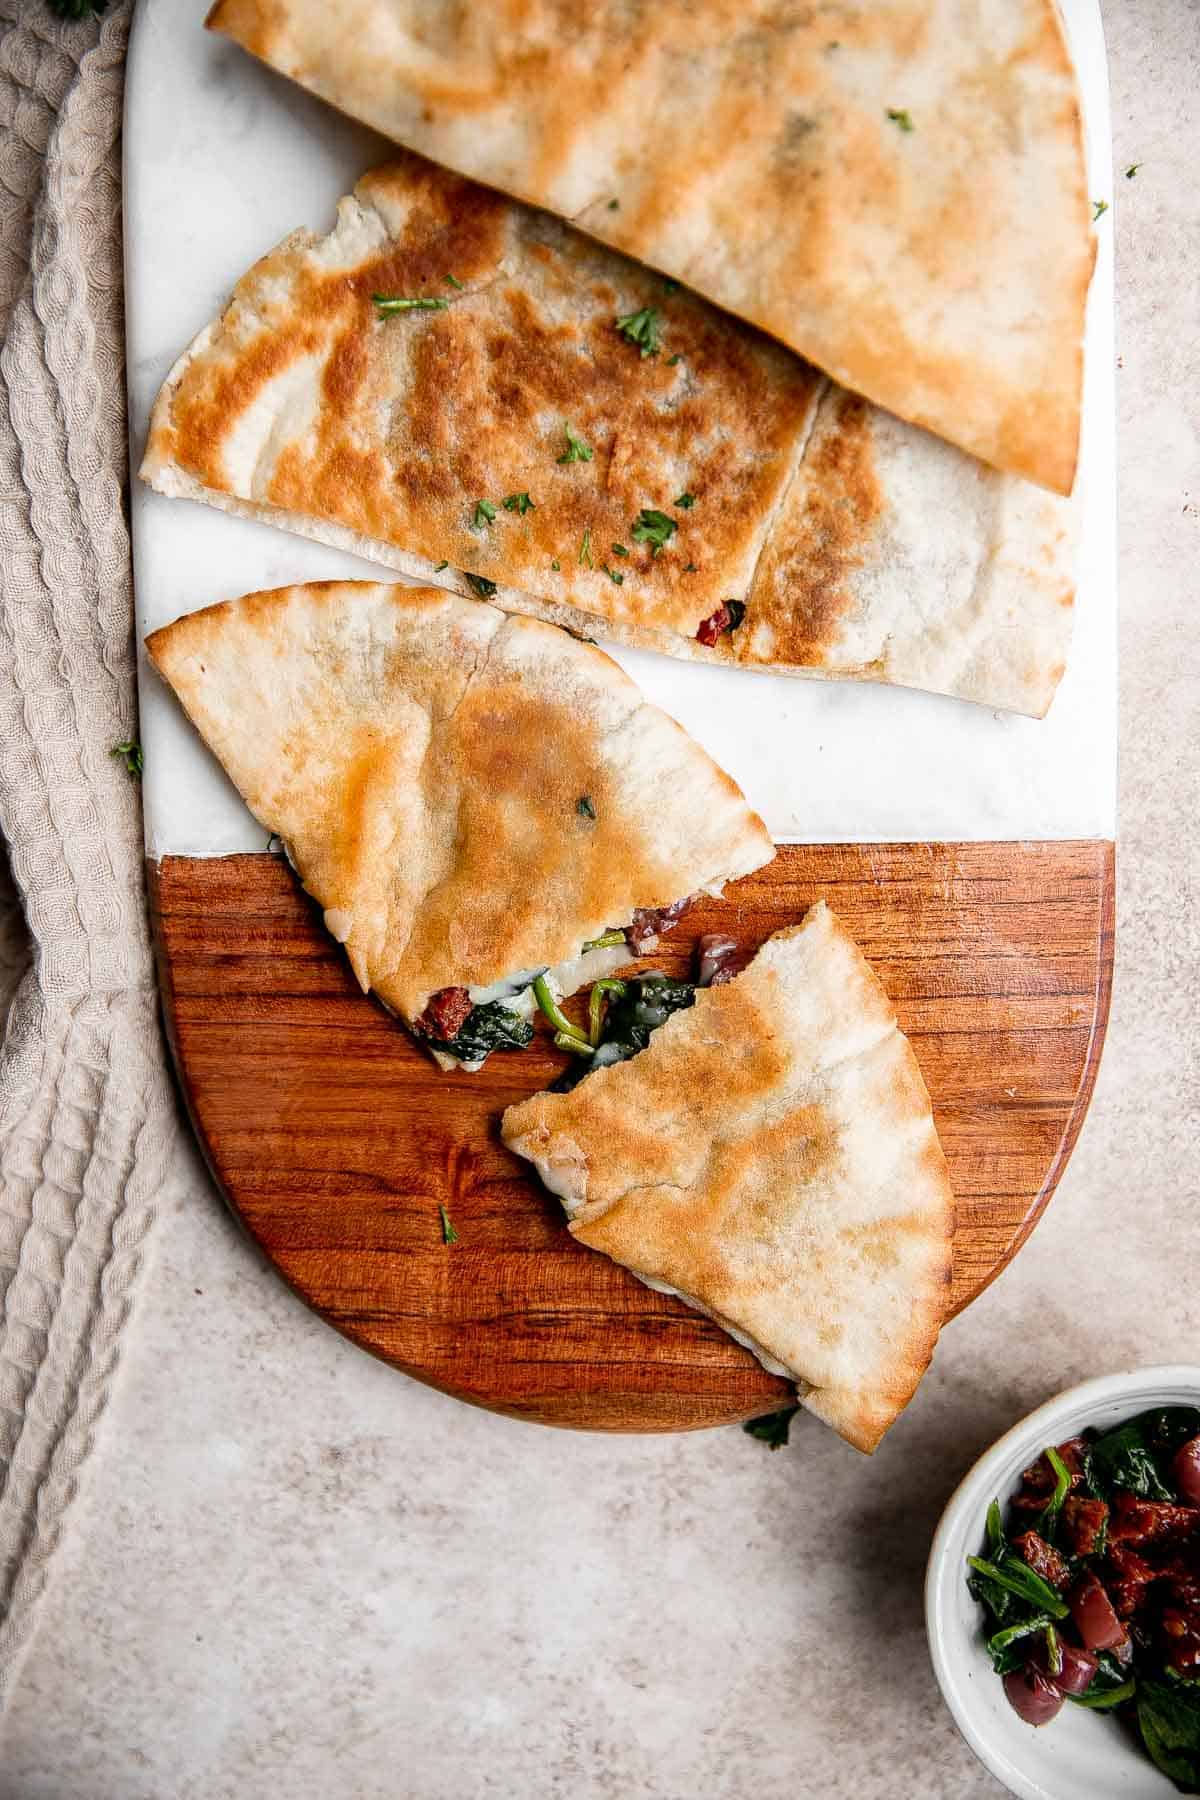 Quick easy pita grilled cheese is loaded with Mediterranean flavors of spinach, olive, and sun-dried tomato stuffed inside pita bread with cheddar cheese. | aheadofthyme.com